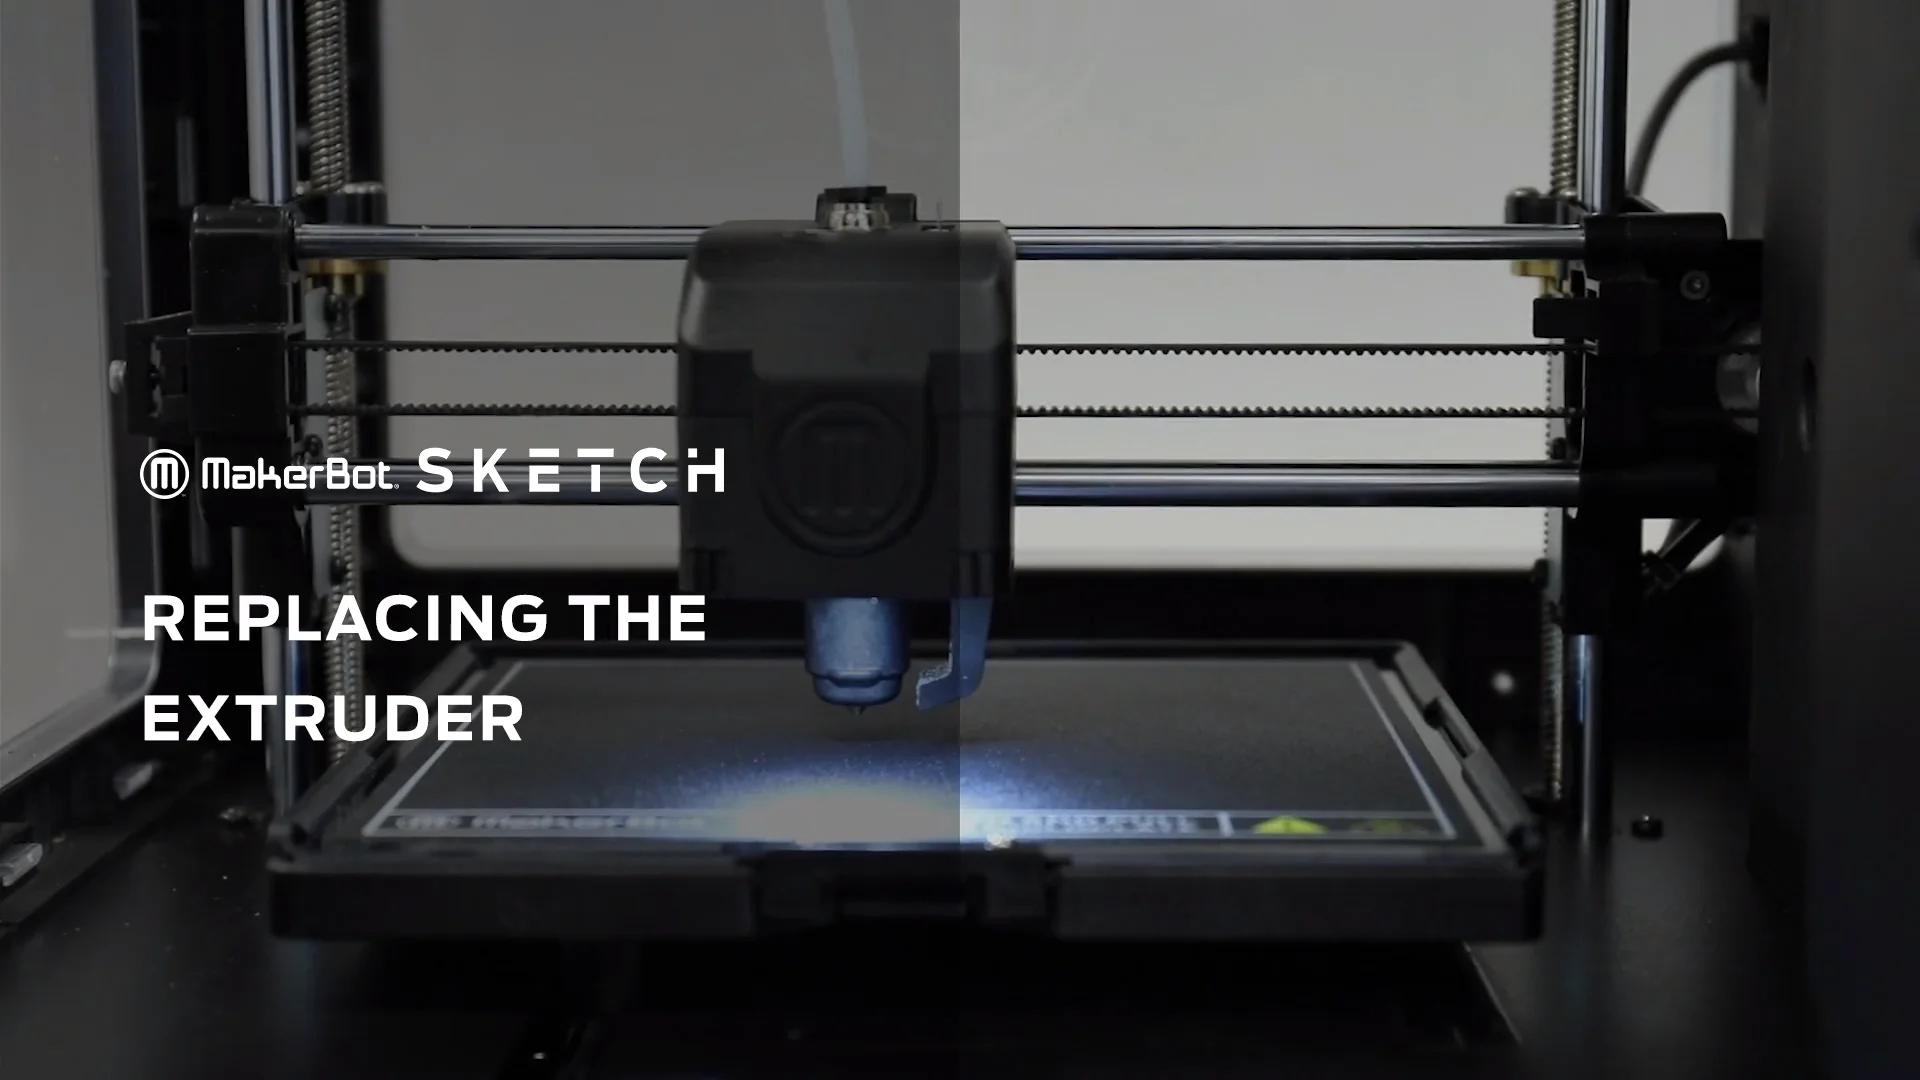 About the SKETCH Extruder